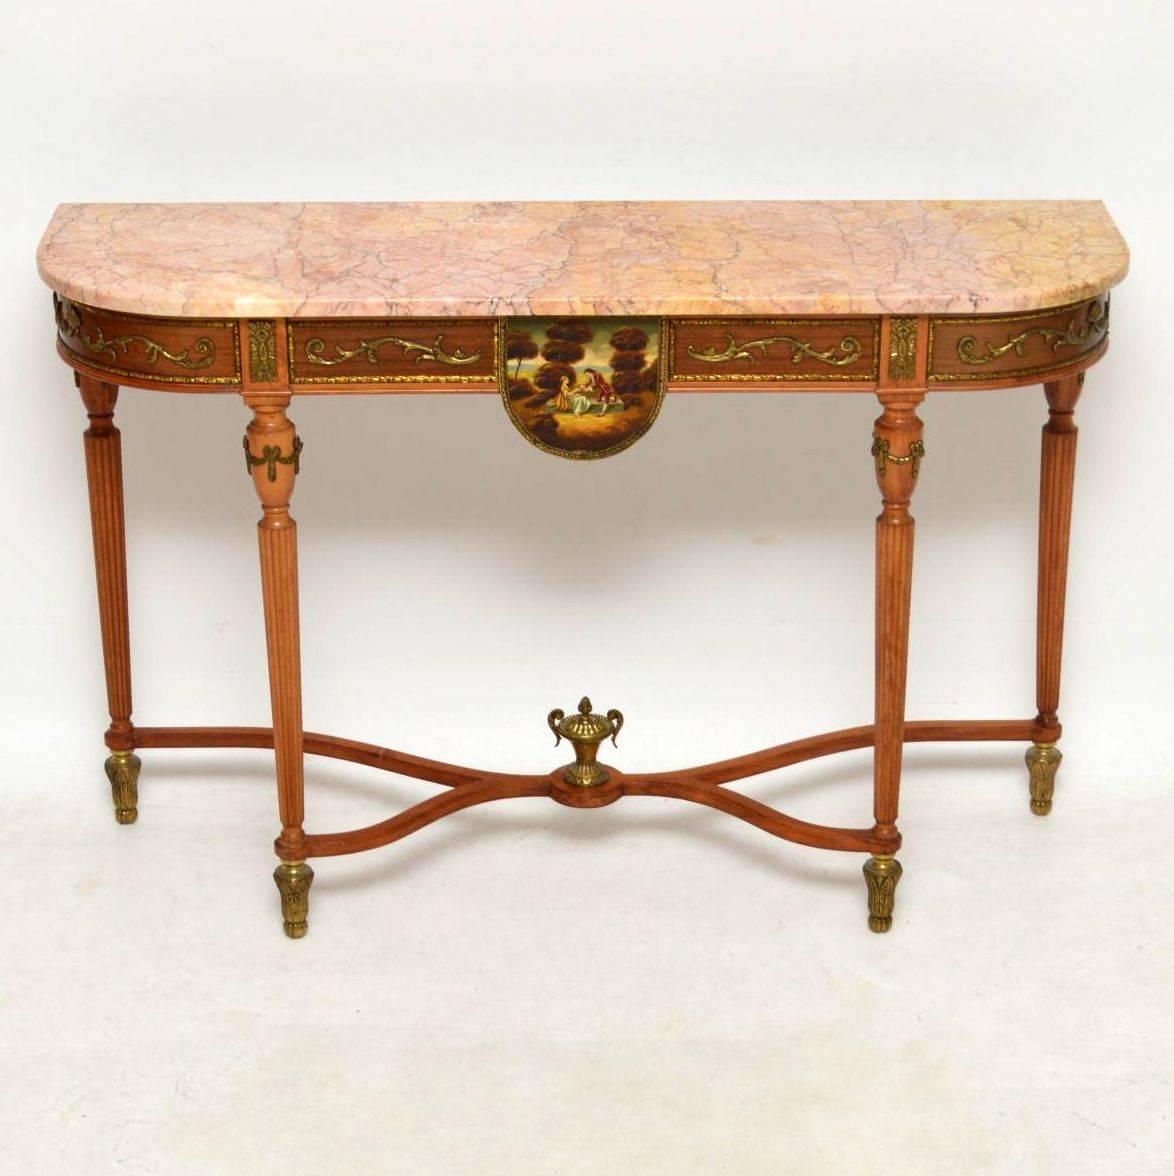 Impressive antique French Louis XV style marble-top console side table, in excellent condition and dating to around the 1950s period. The detachable marble top is perfect. The base is mahogany with lots of gilt mounts and other decorations. There's